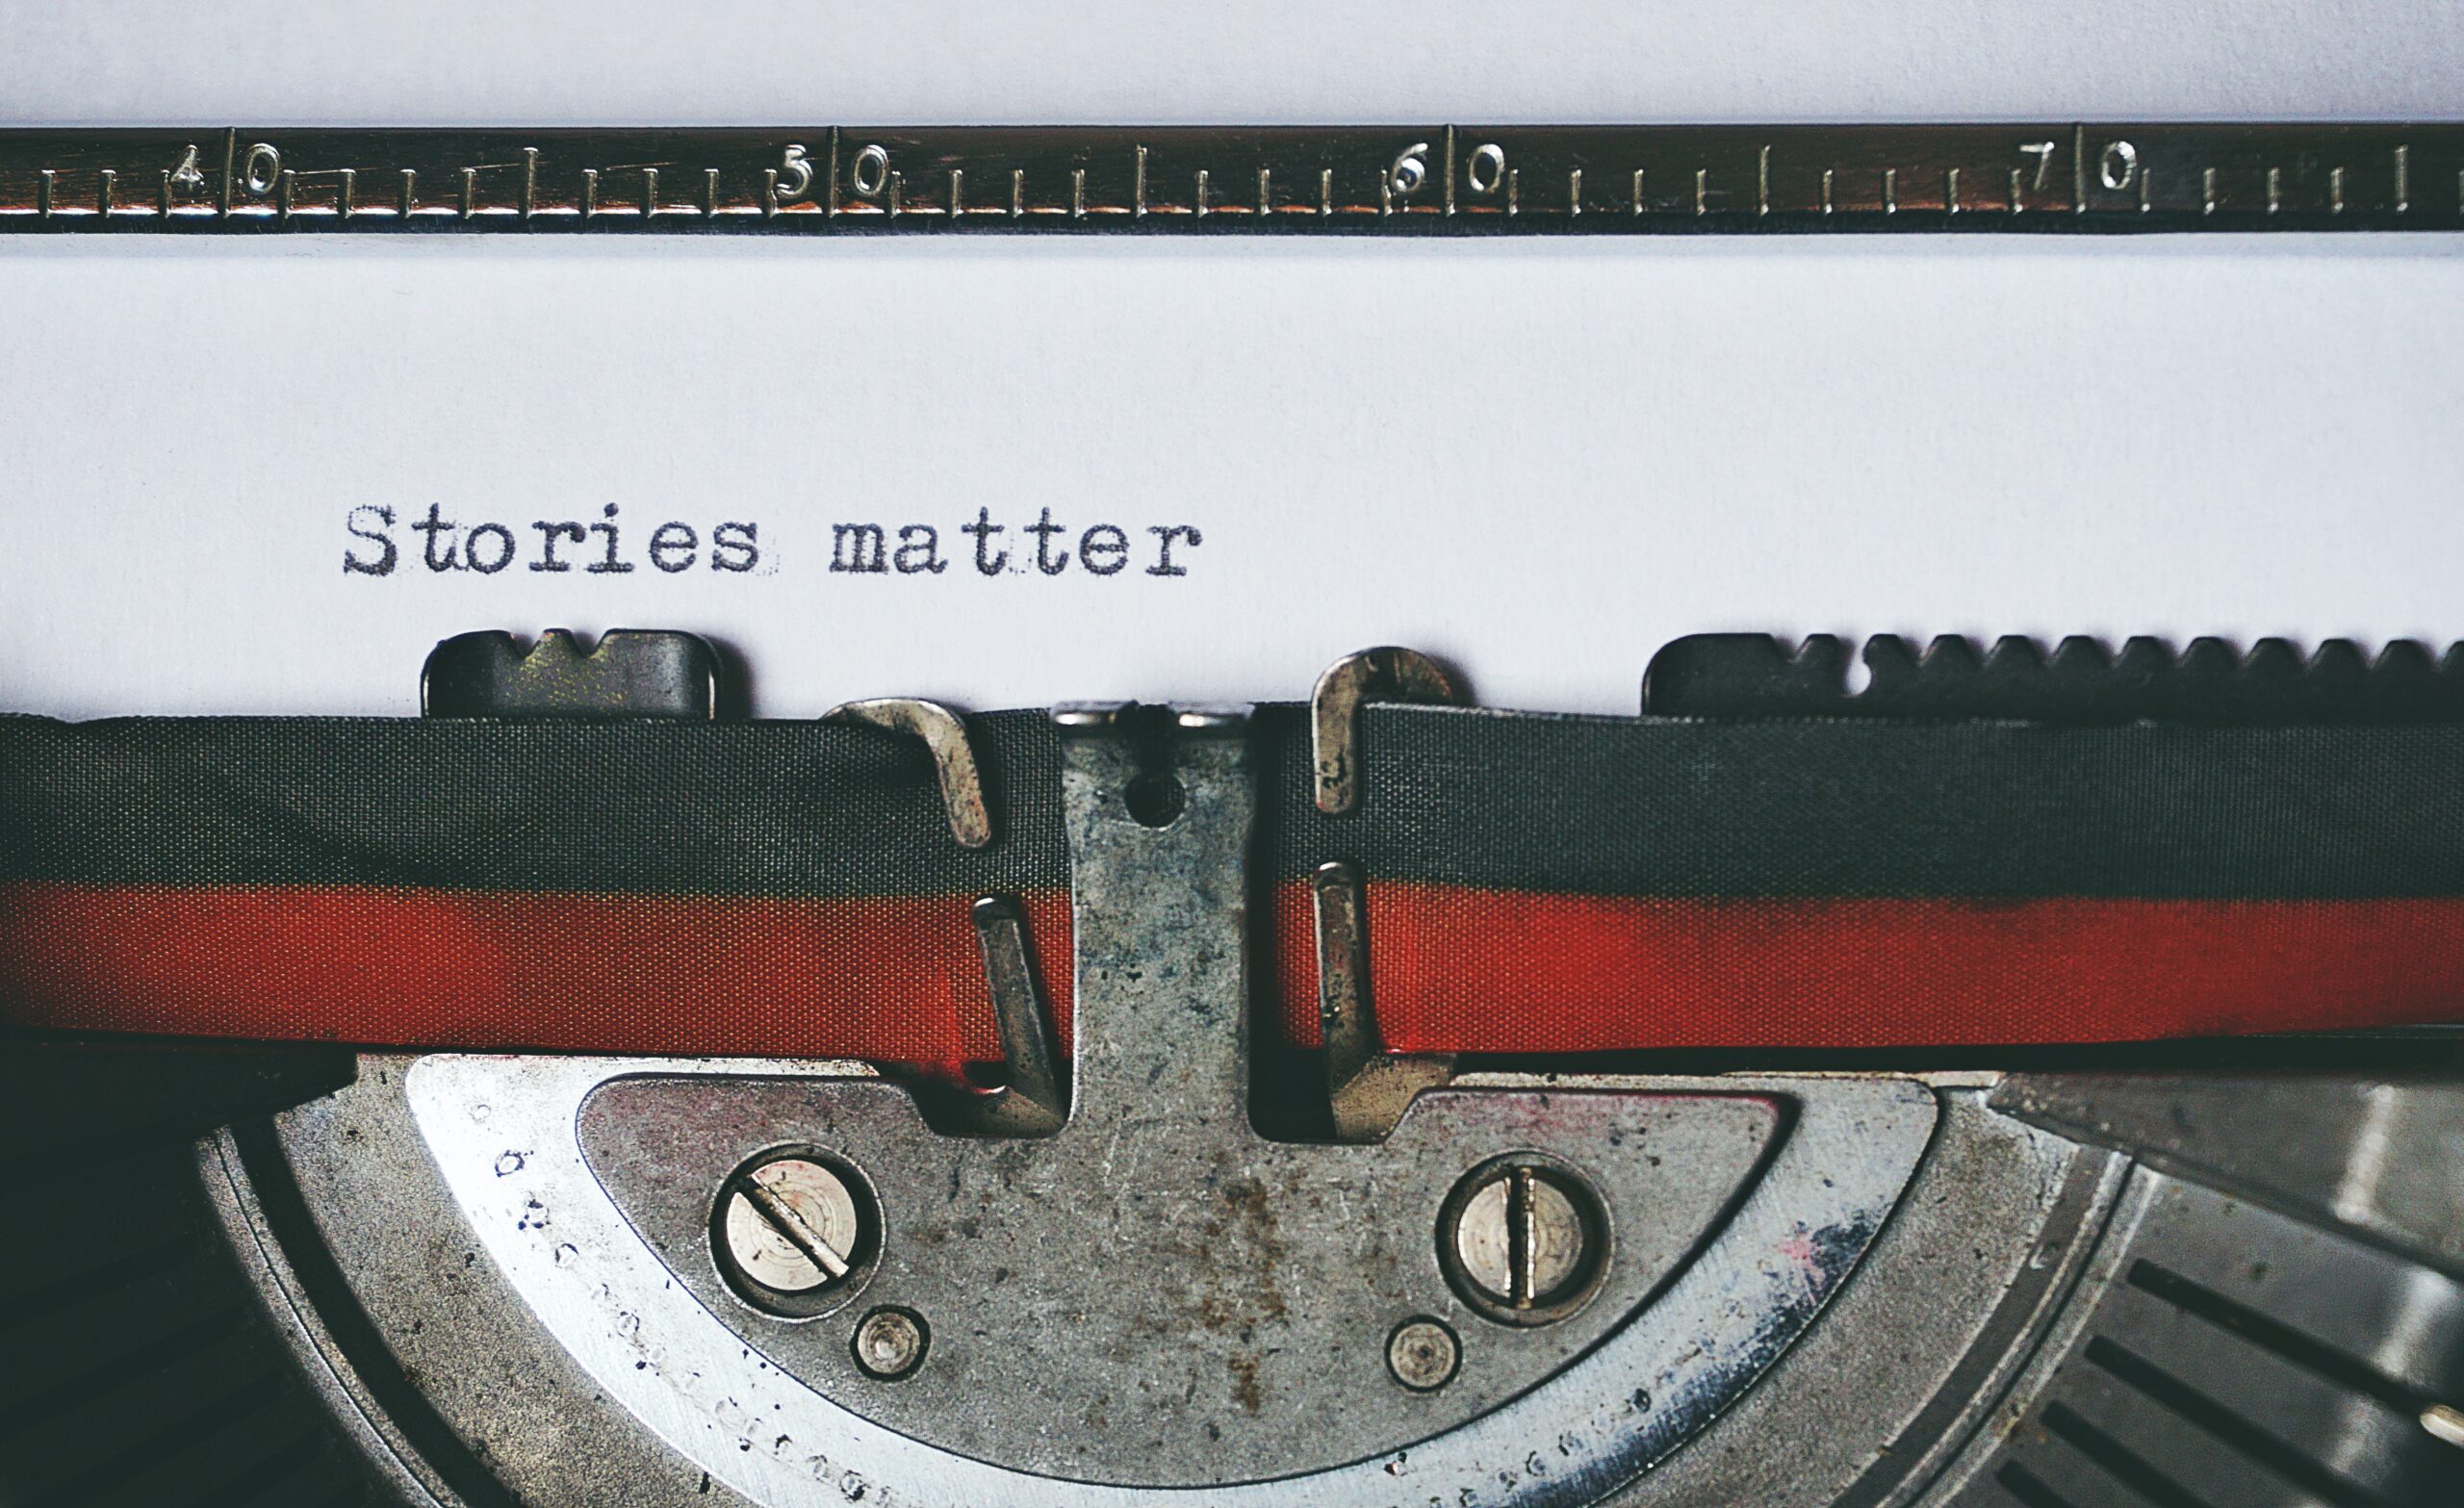 black and red typewriter with the text "stories matter"